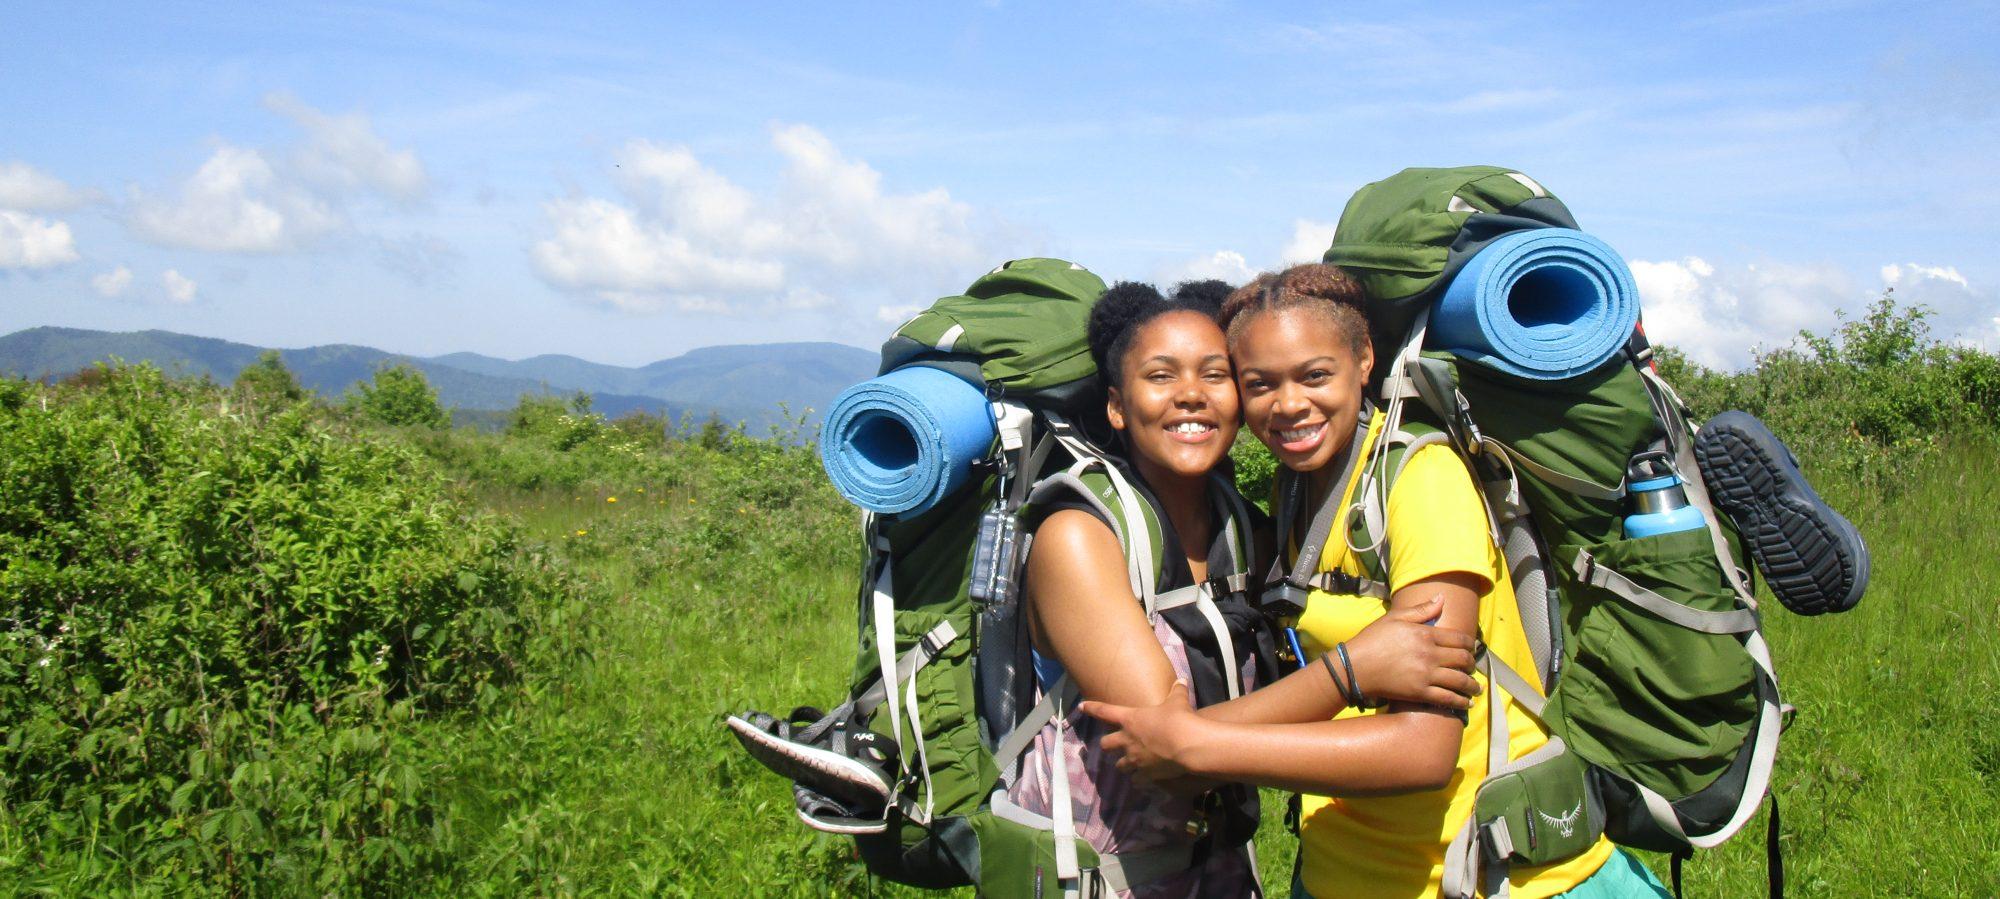 Two young women with backpacks smiling